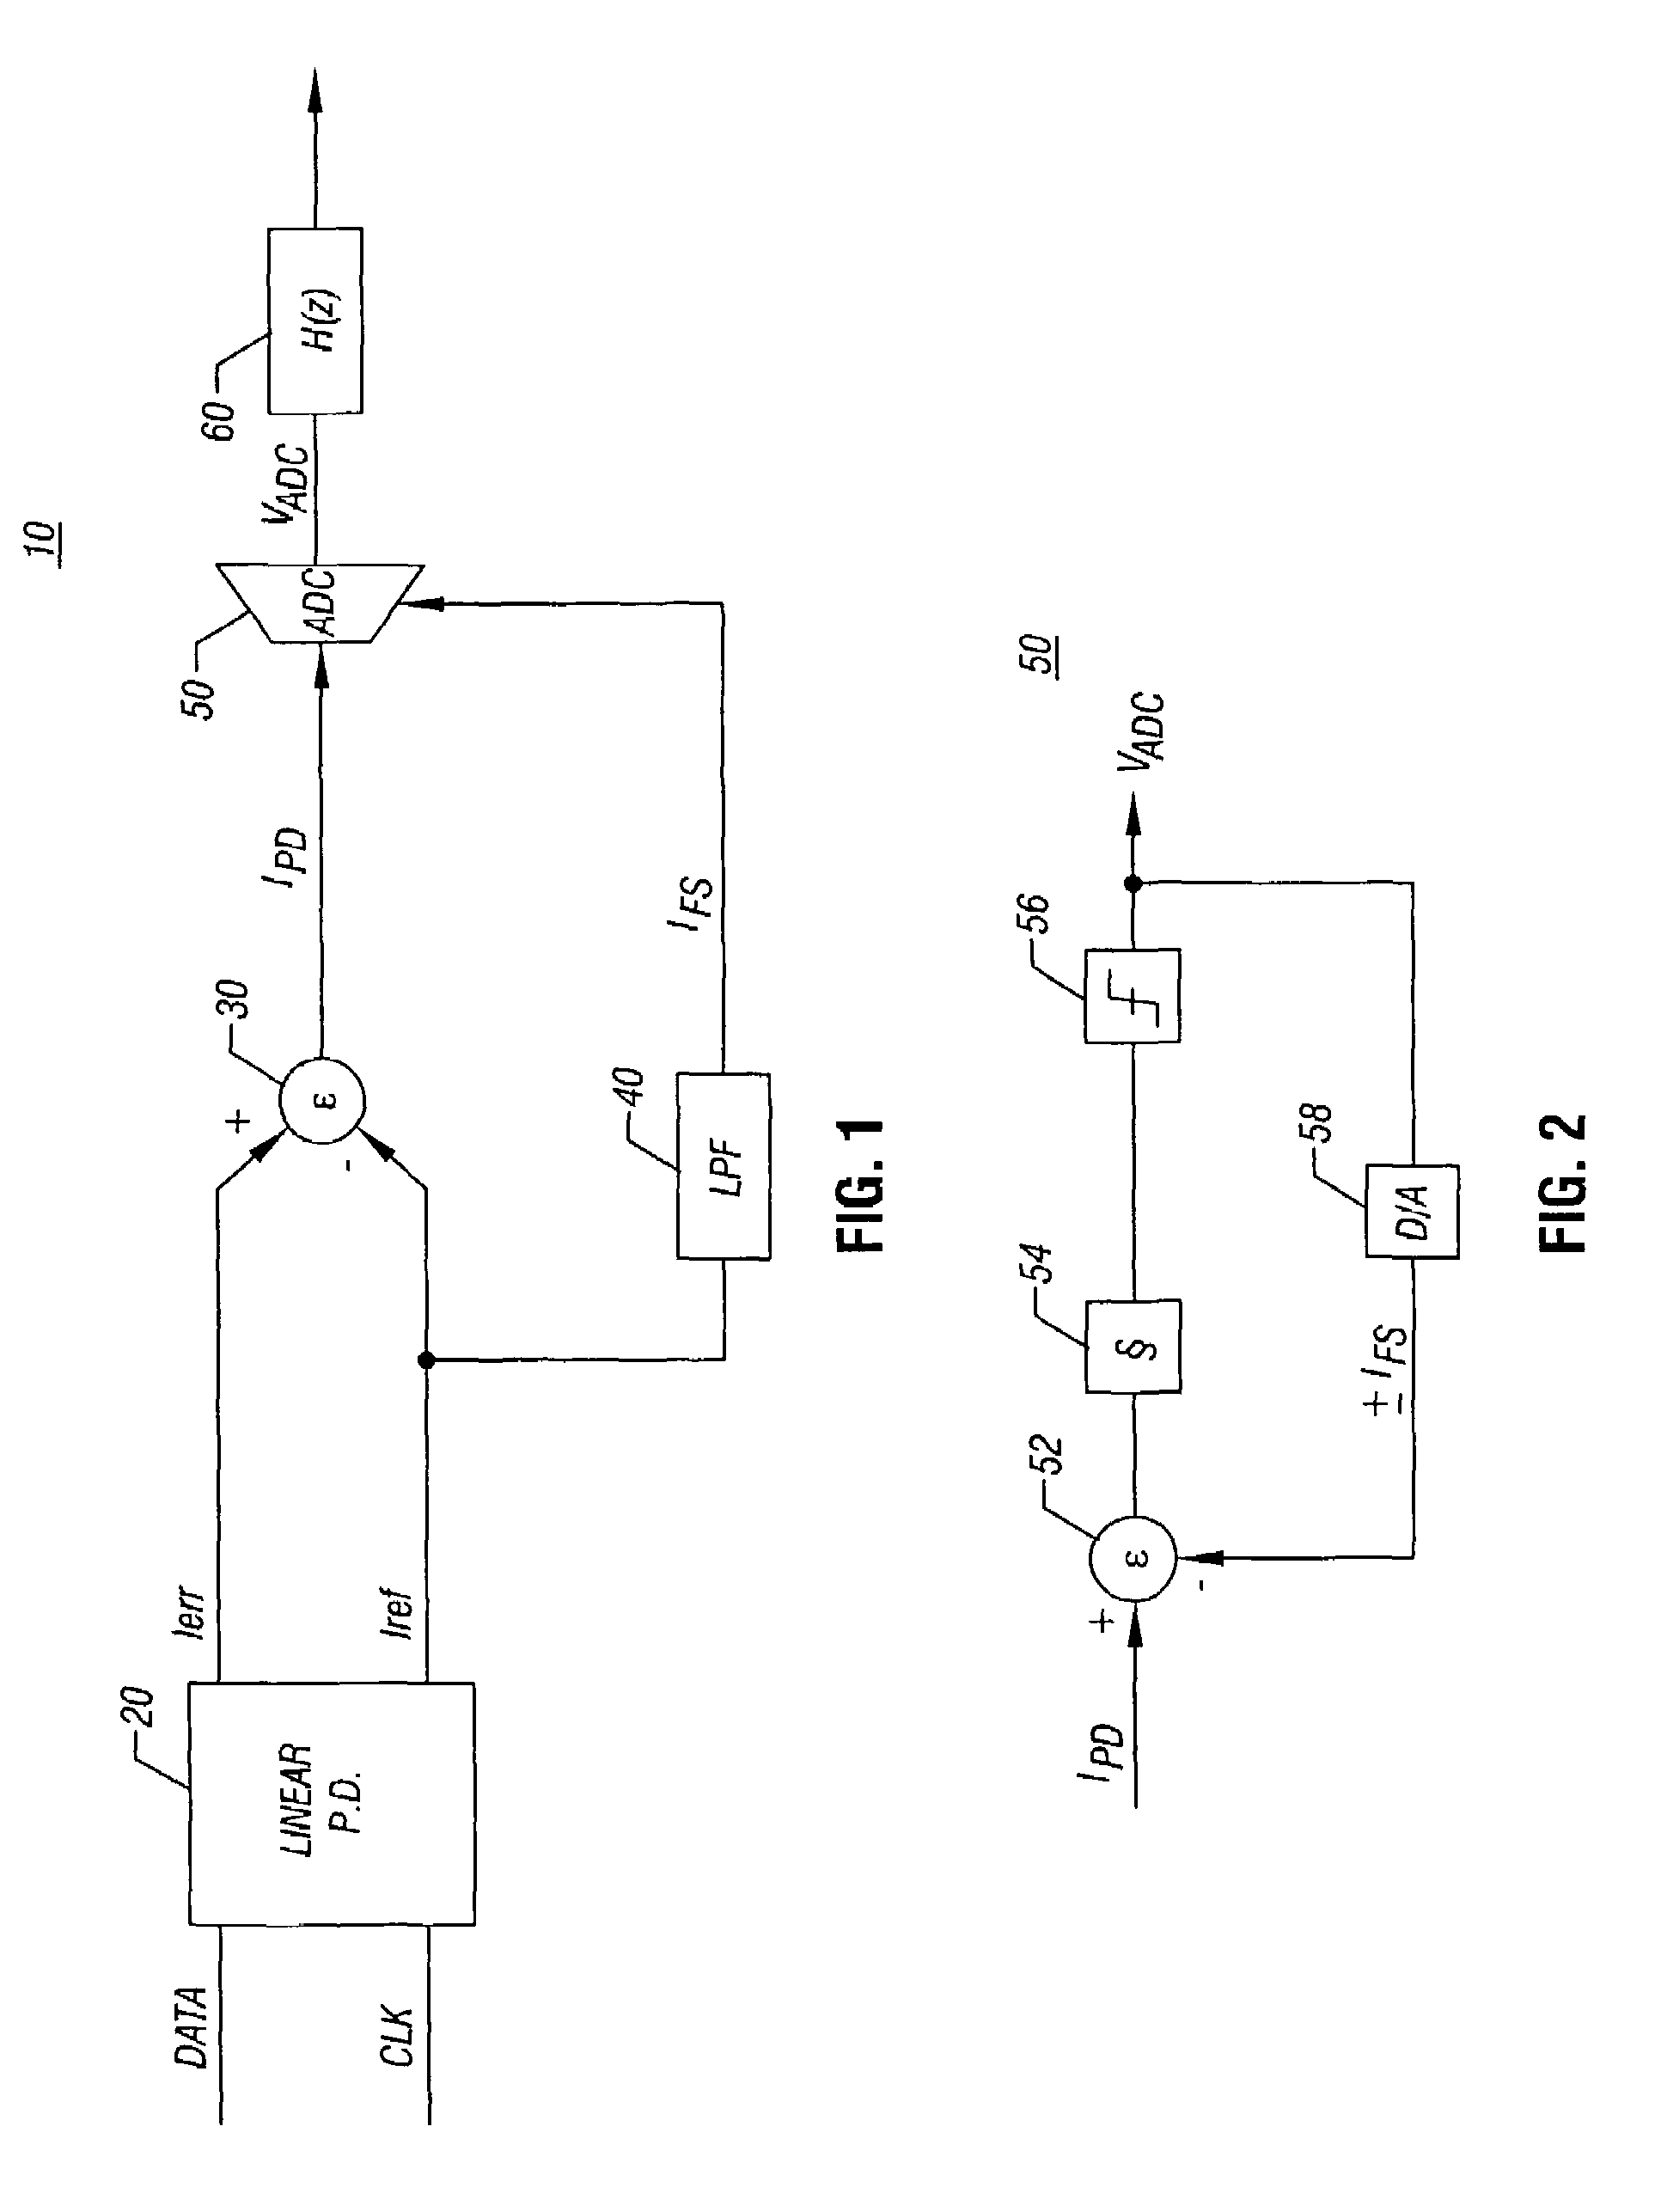 Calibrating a phase detector and analog-to-digital converter offset and gain